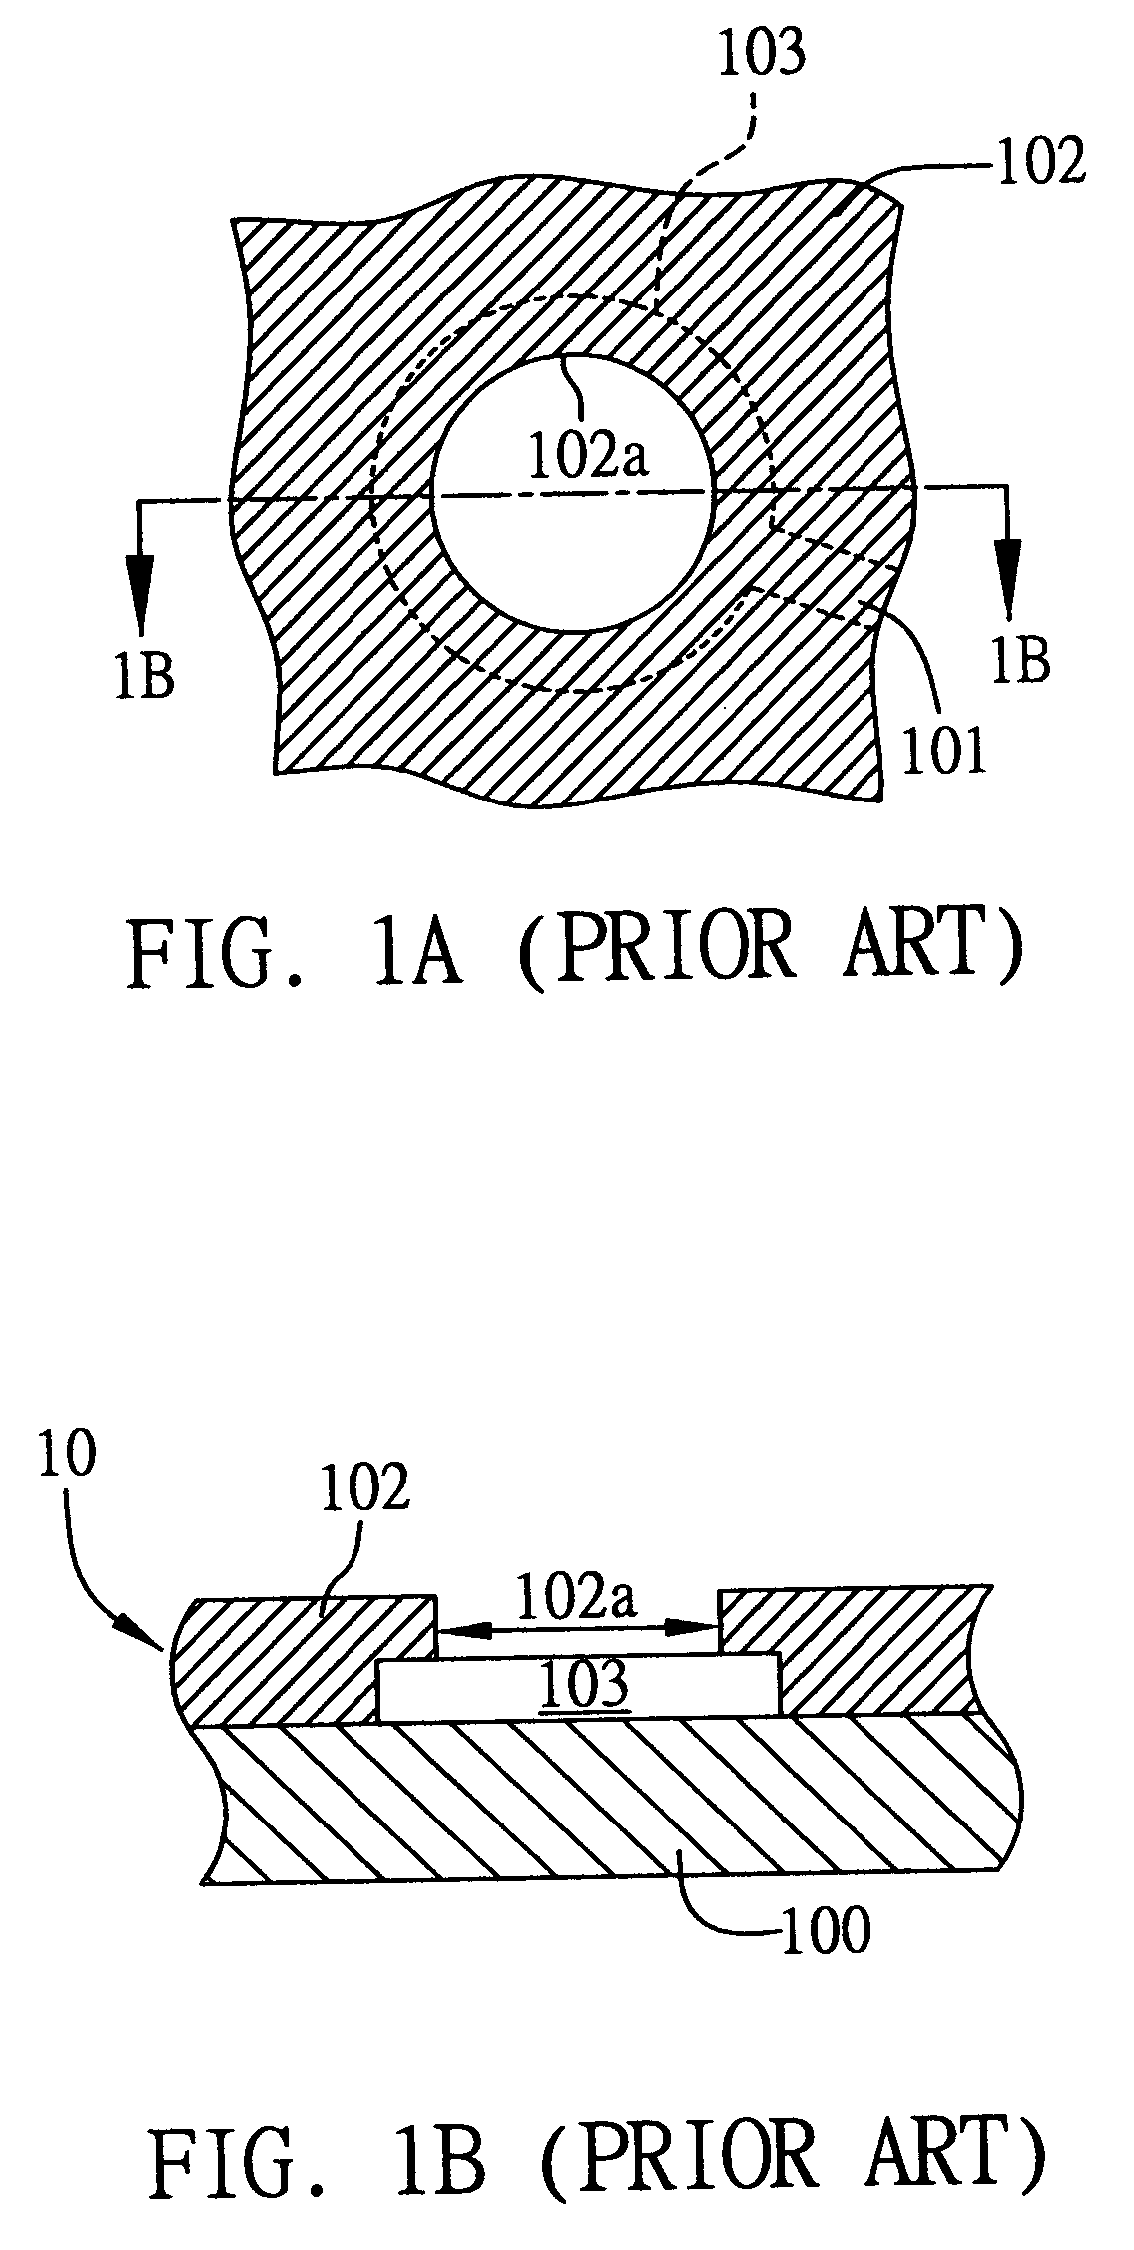 Ground pad structure for preventing solder extrusion and semiconductor package having the ground pad structure